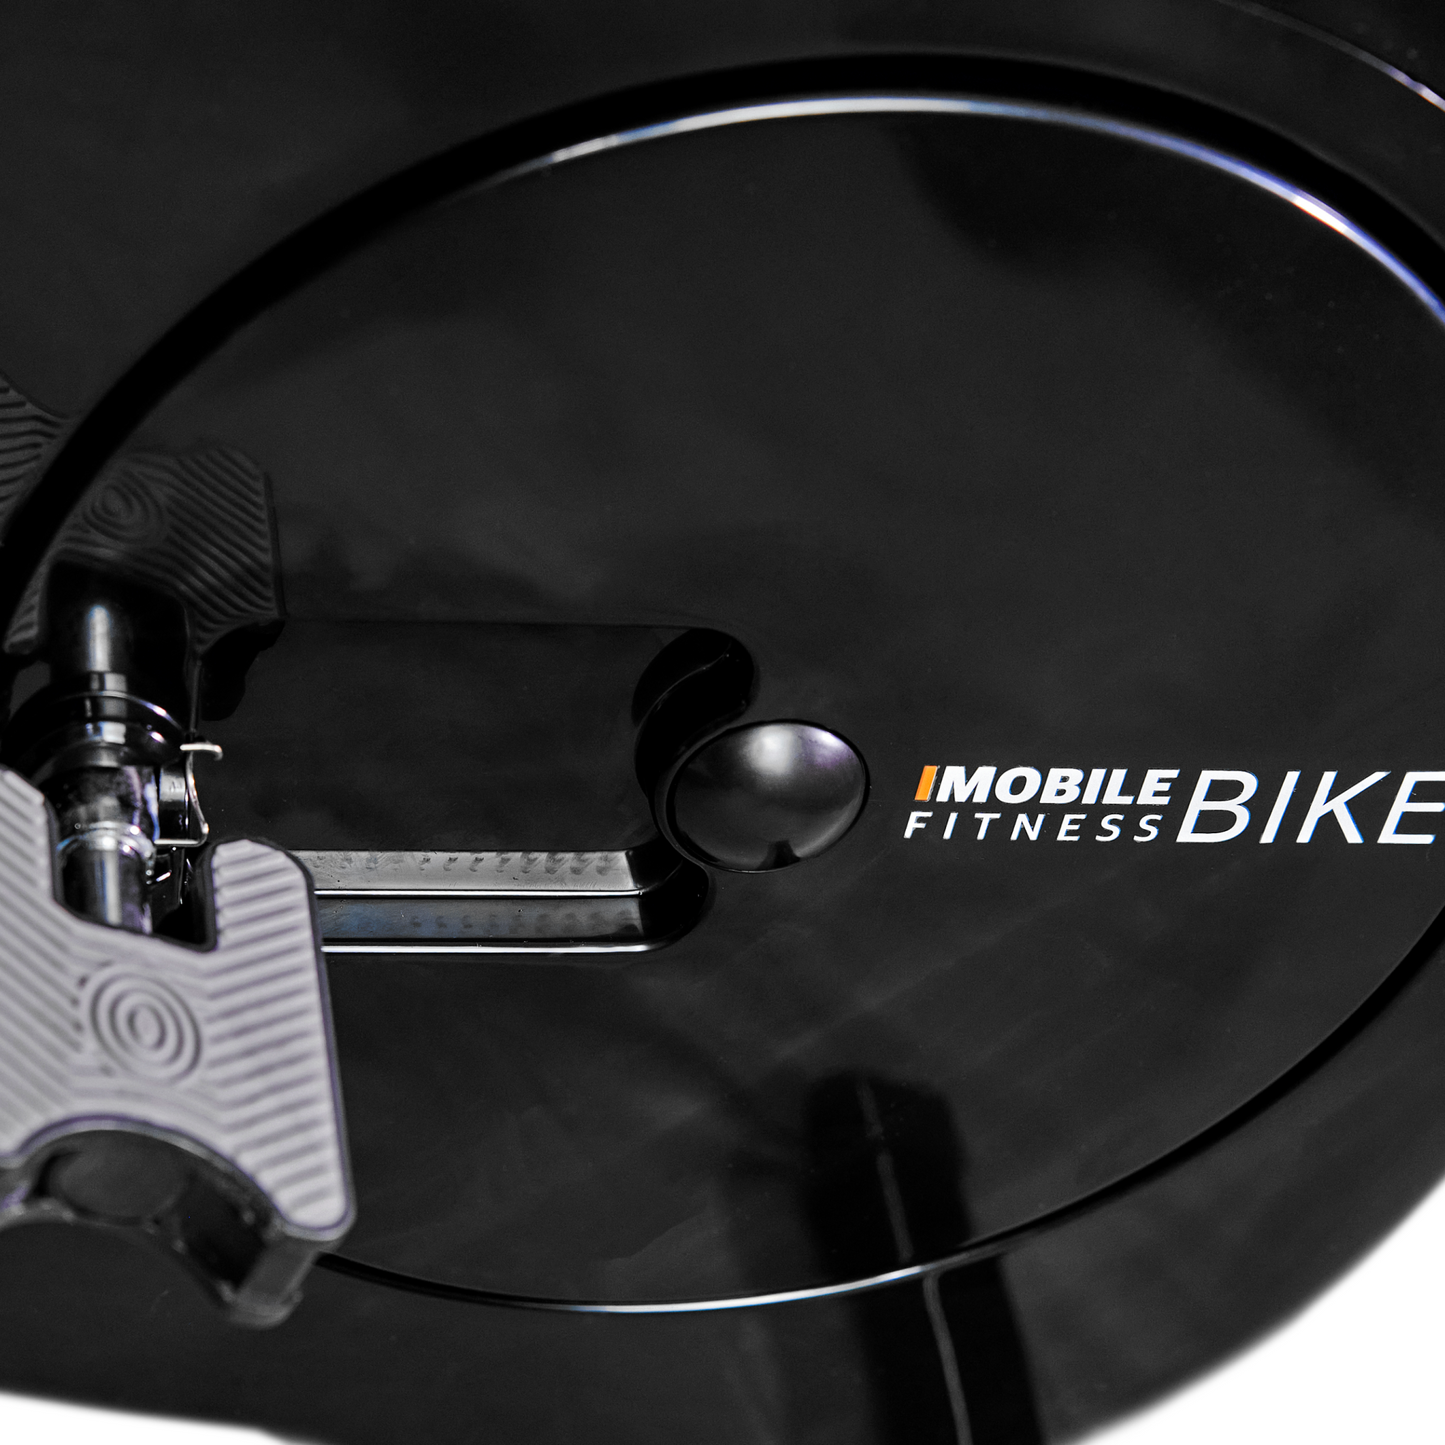 IMF — Only Fitness Bike